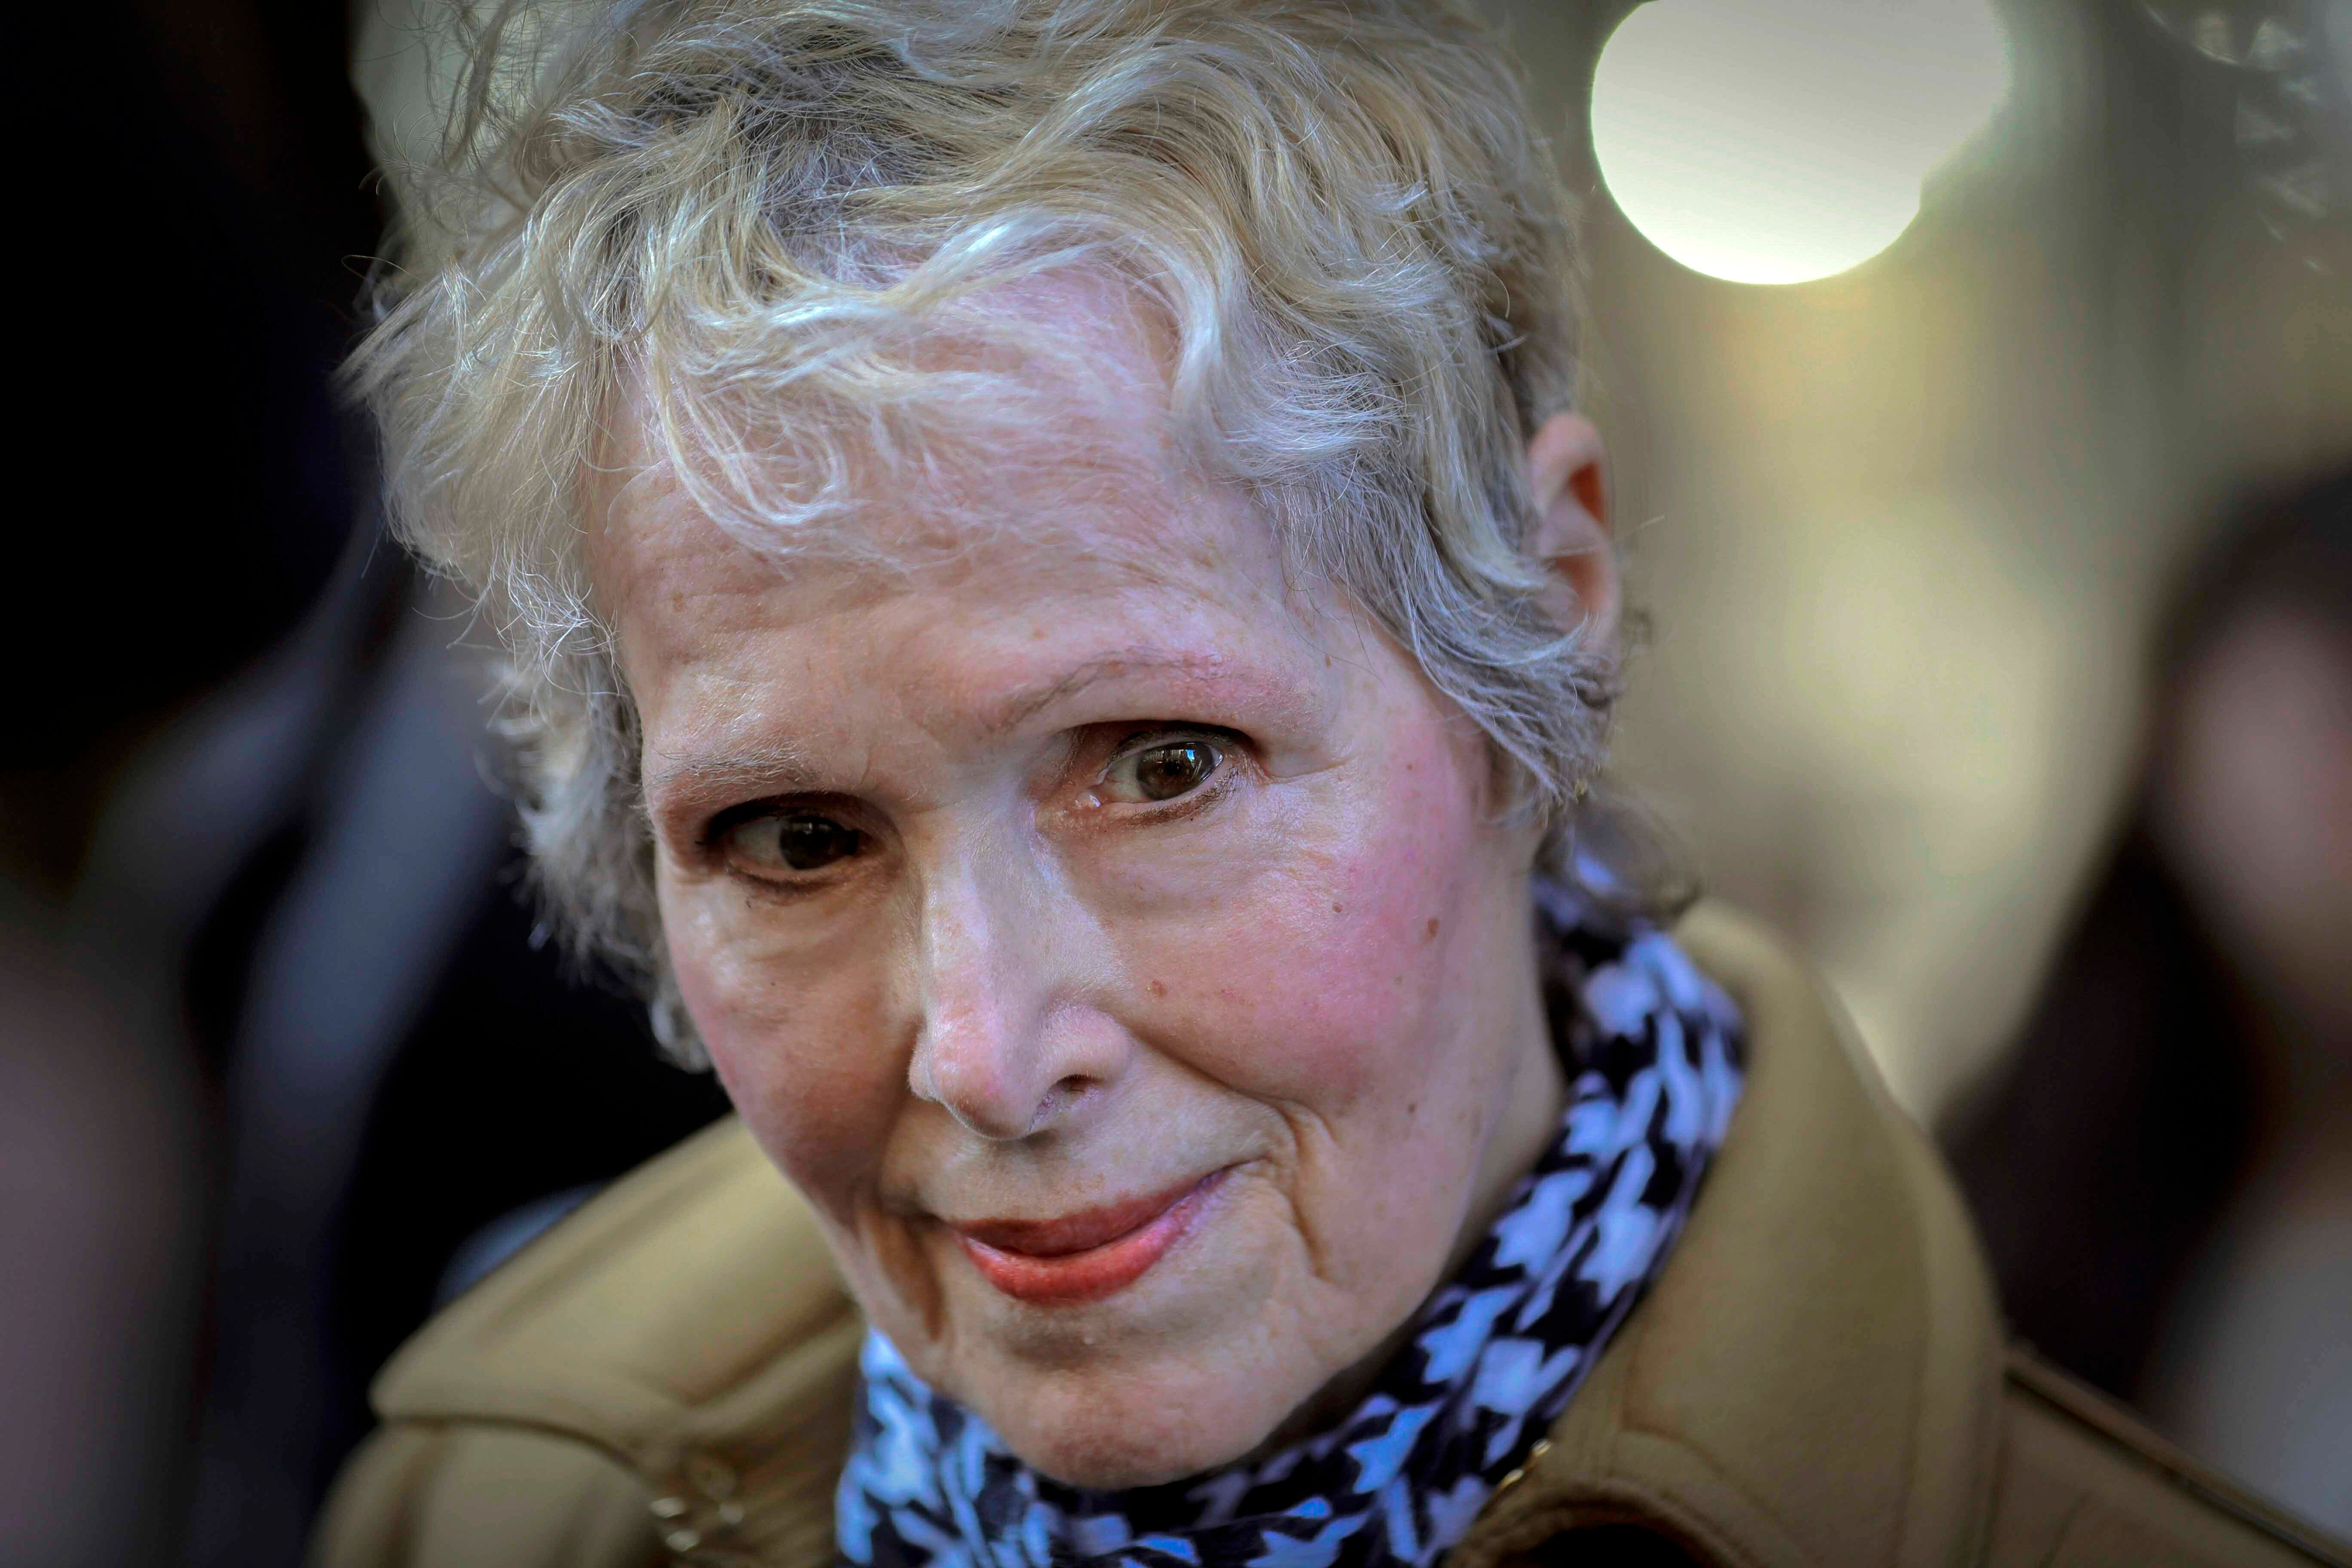 File image: E Jean Carroll talks to reporters outside a courthouse in New York